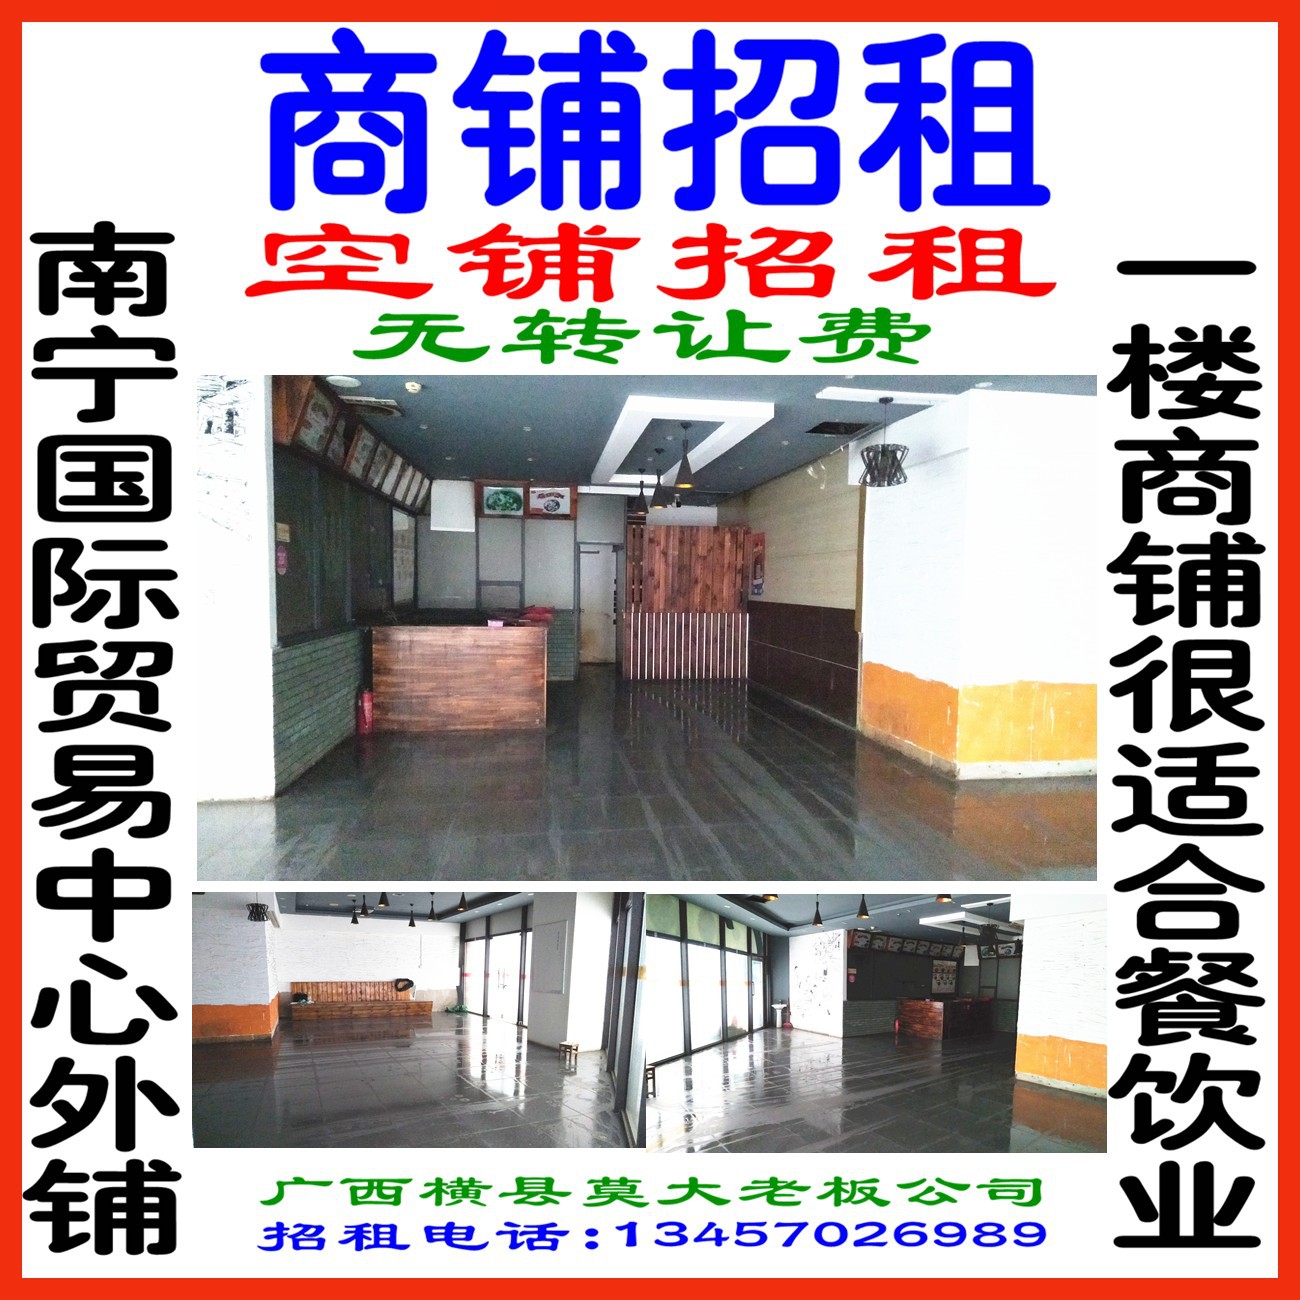 Nanning Restaurant Shop for rent International Trade core First floor Shop for rent Suitable for catering industry Catering shop